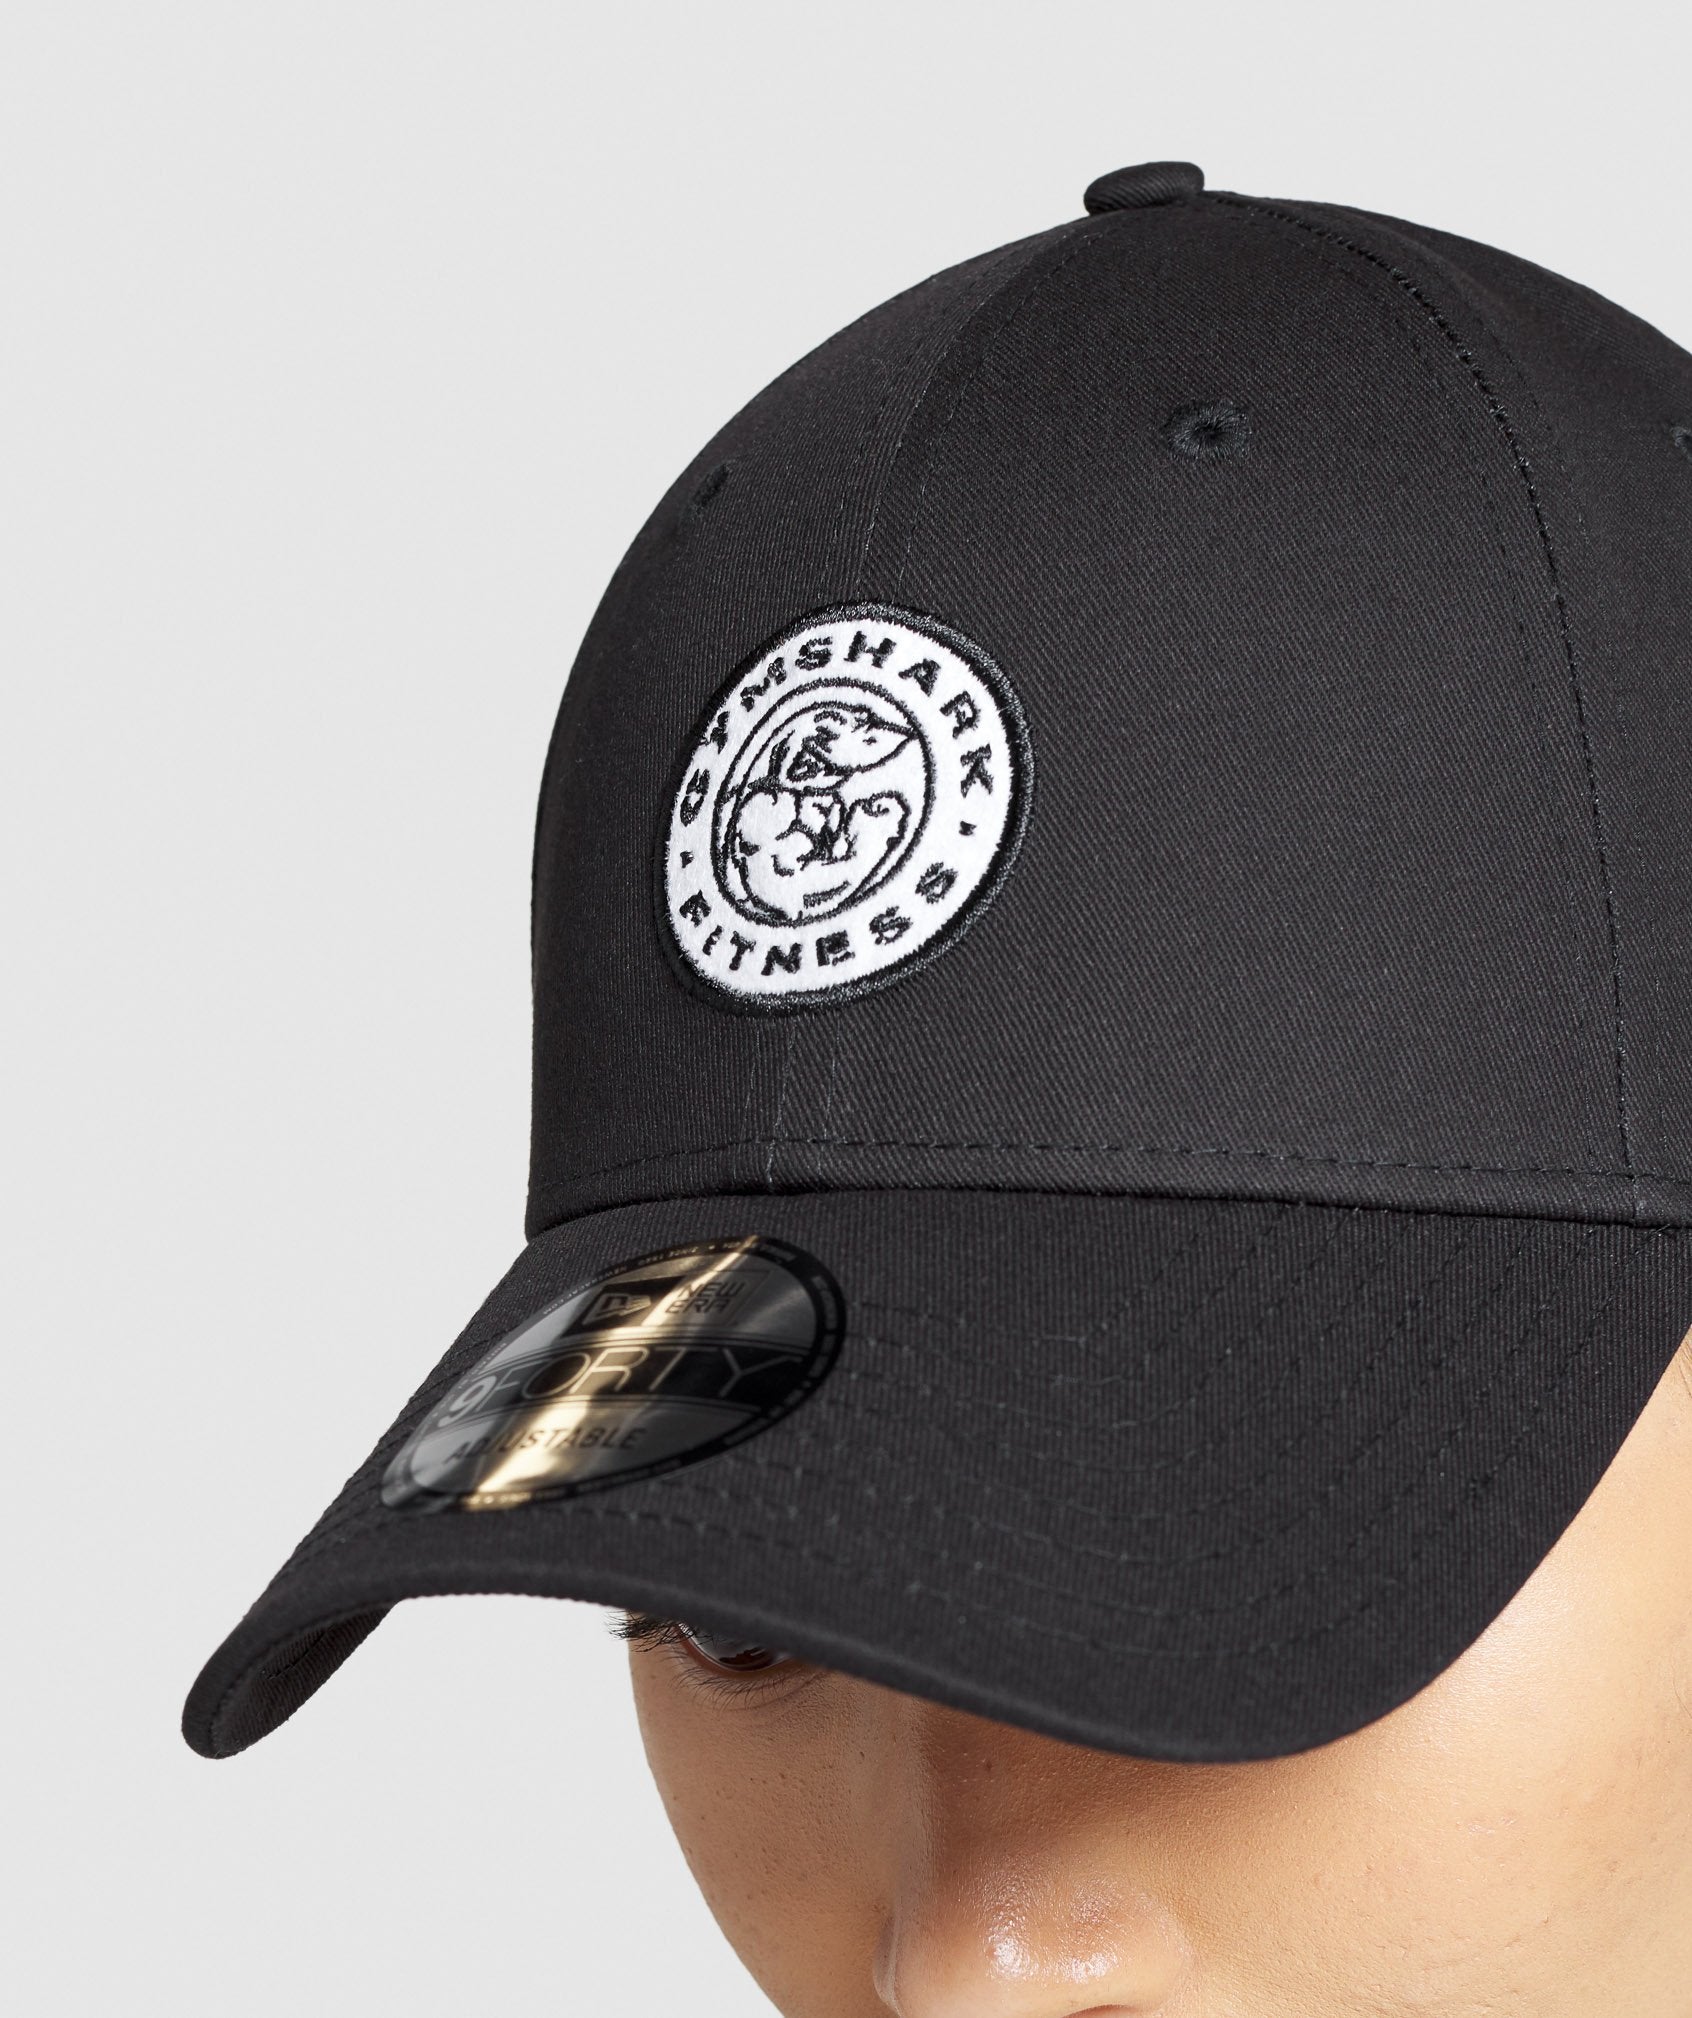 New Era Legacy 9Forty in Black - view 1